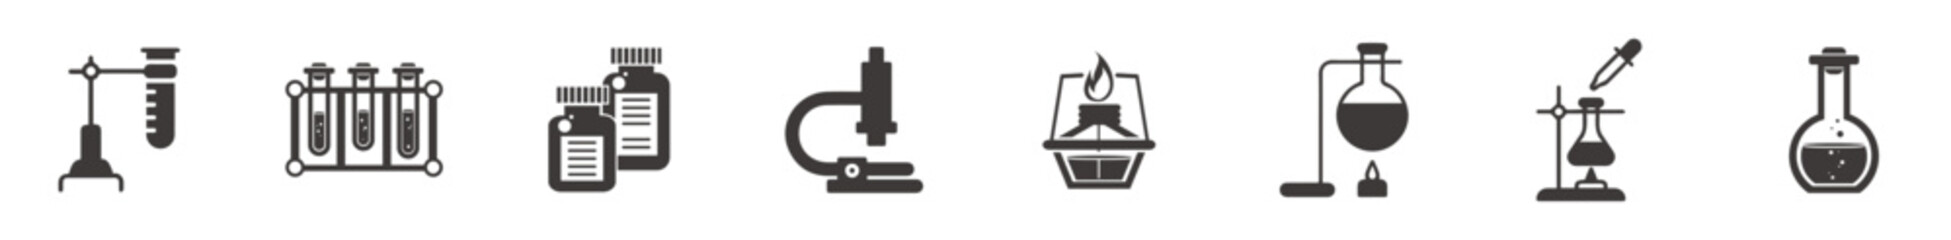 Chemistry and science black vector icon set.